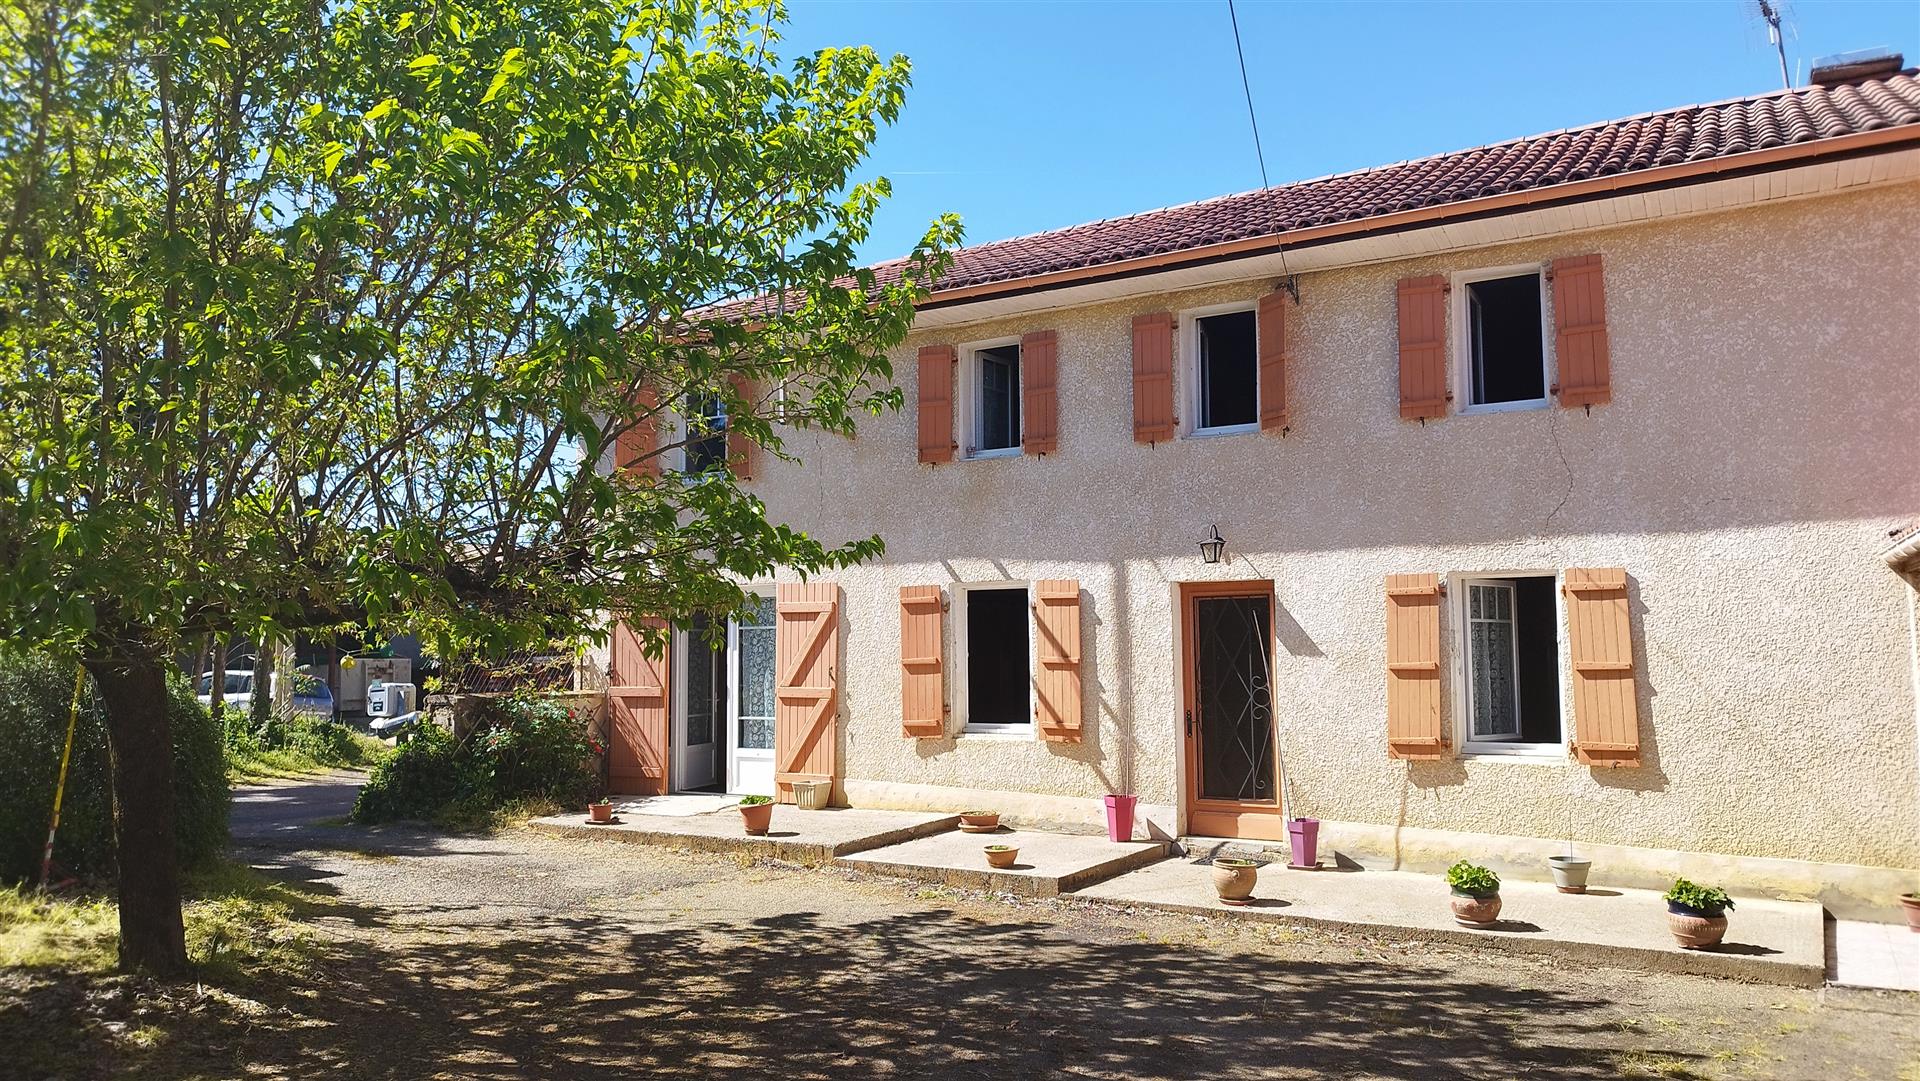 Farmhouse of 234 m² with barn of 250 m² and orchard, on 4 hectares of land - ideal for livestock fa